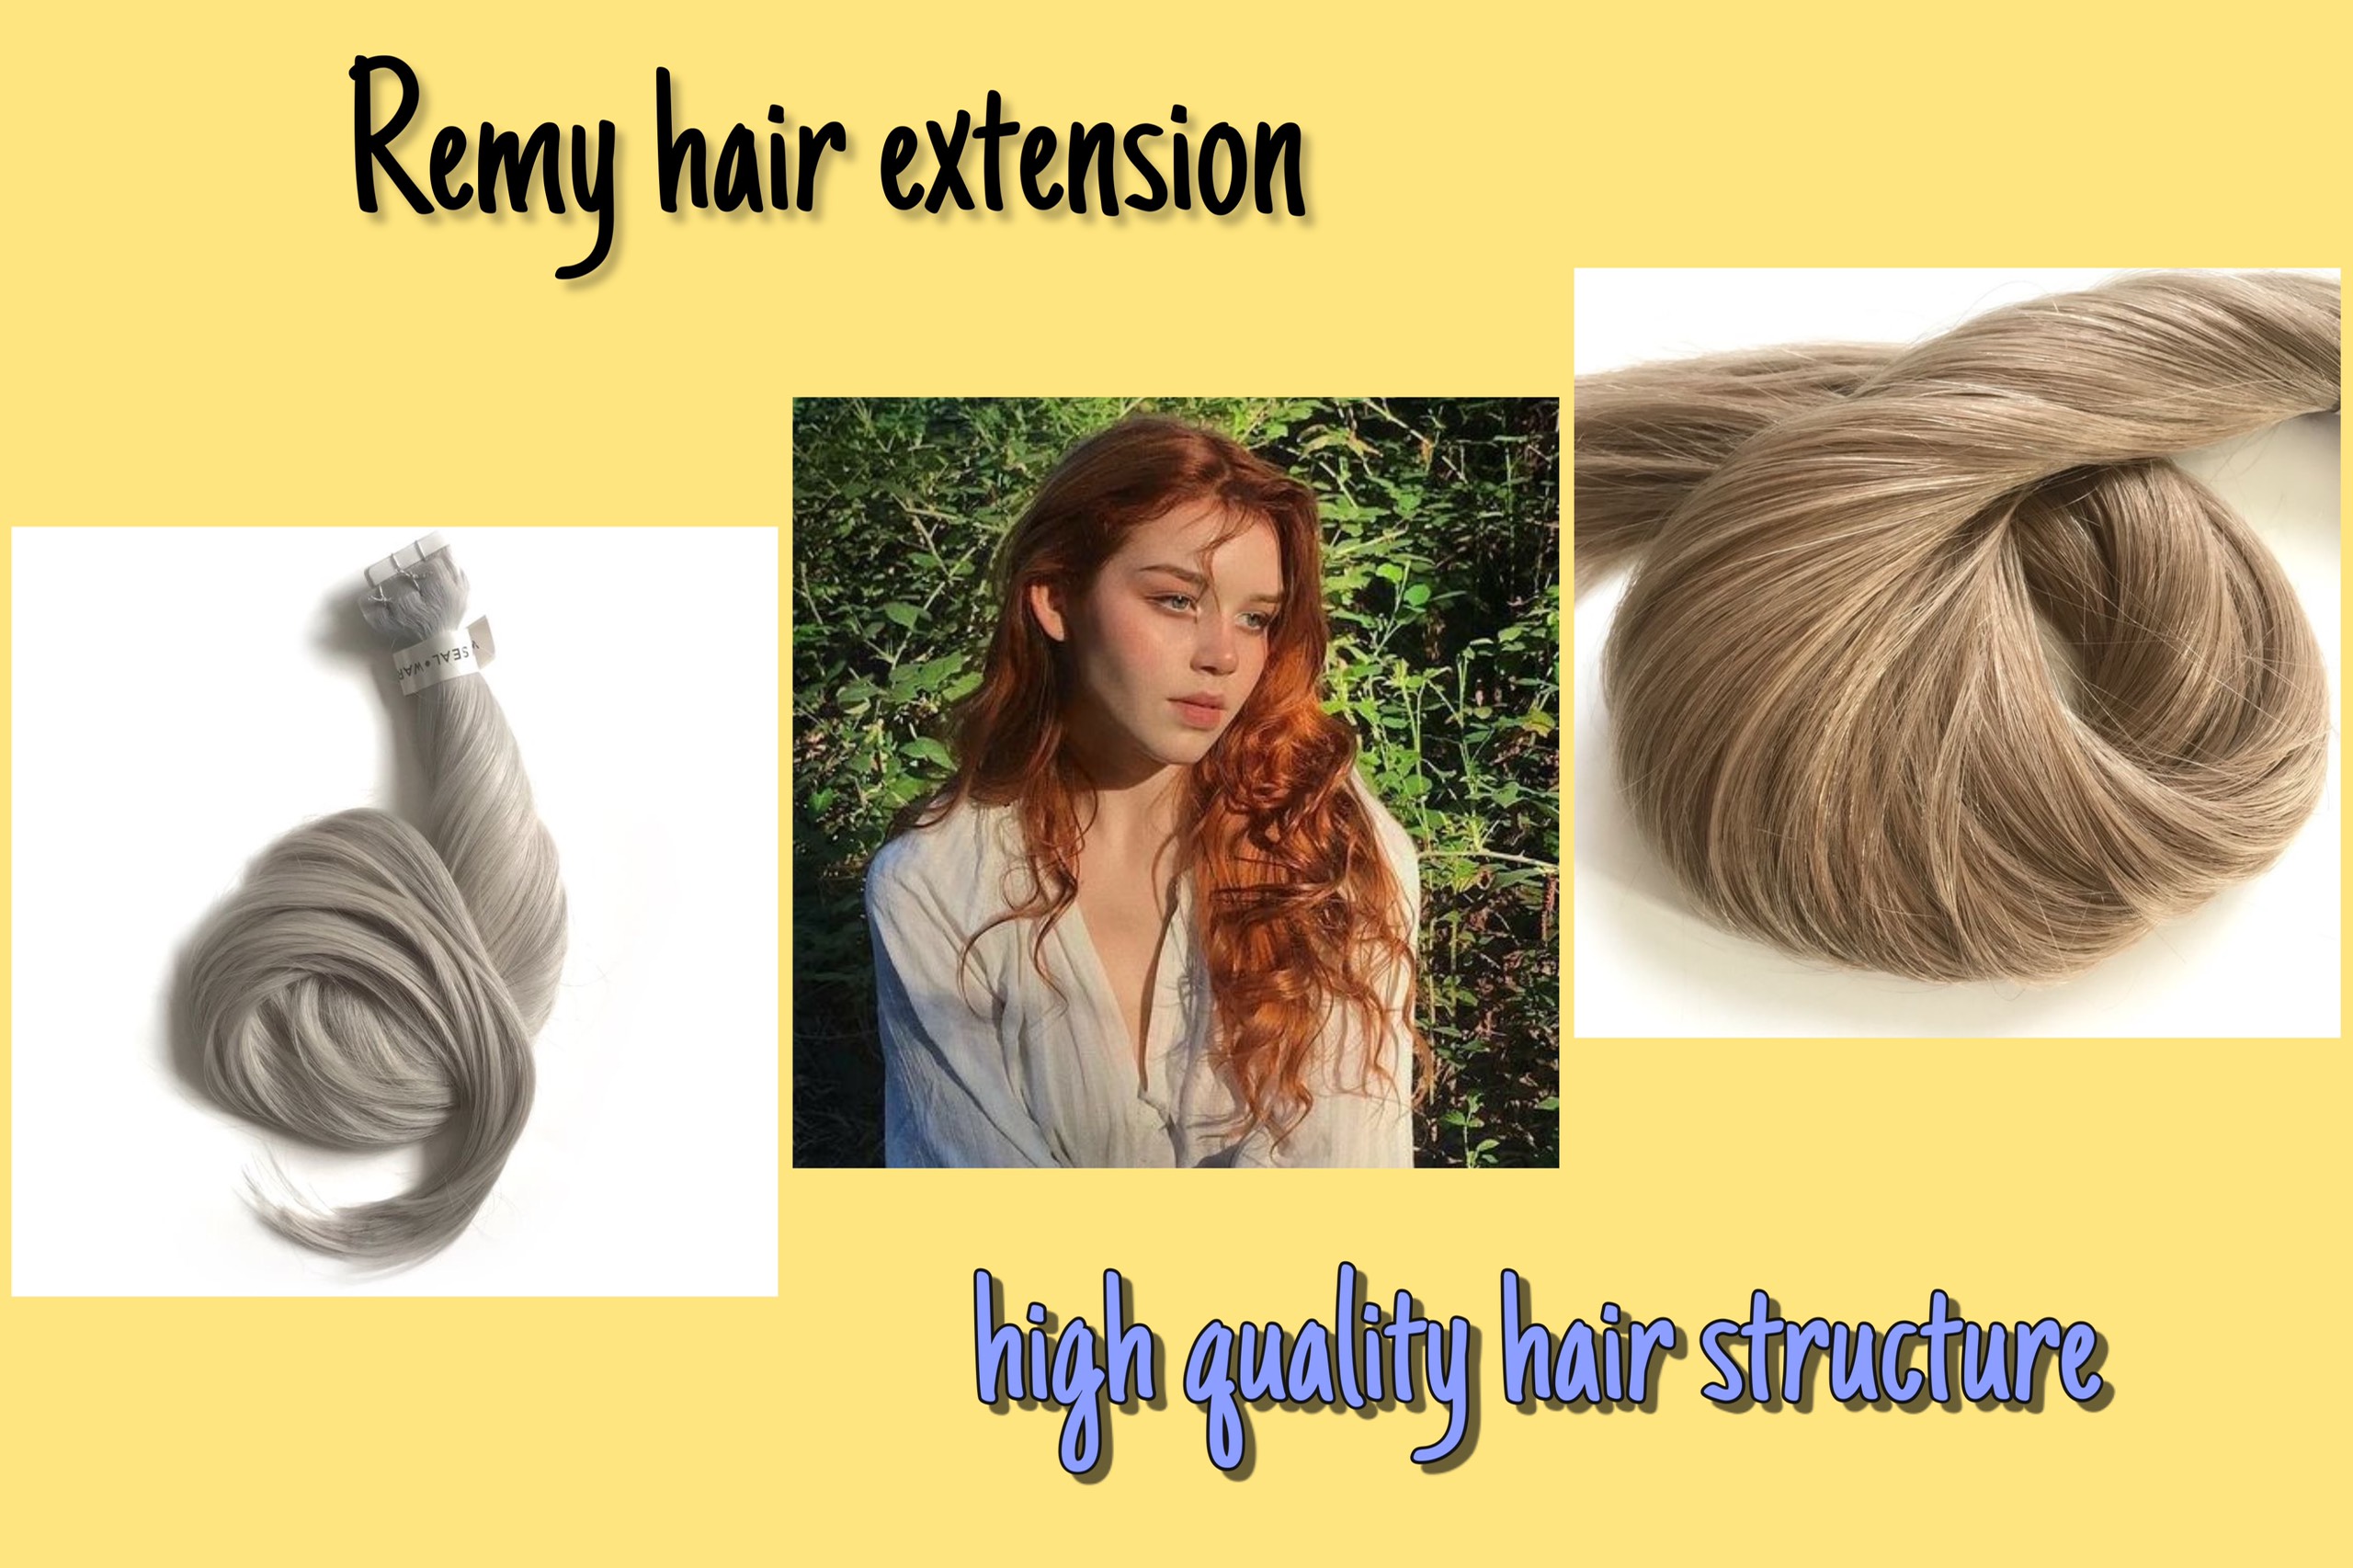 remy-hair-extension-finding-high-quality-remy-hair-extension-suppliers2